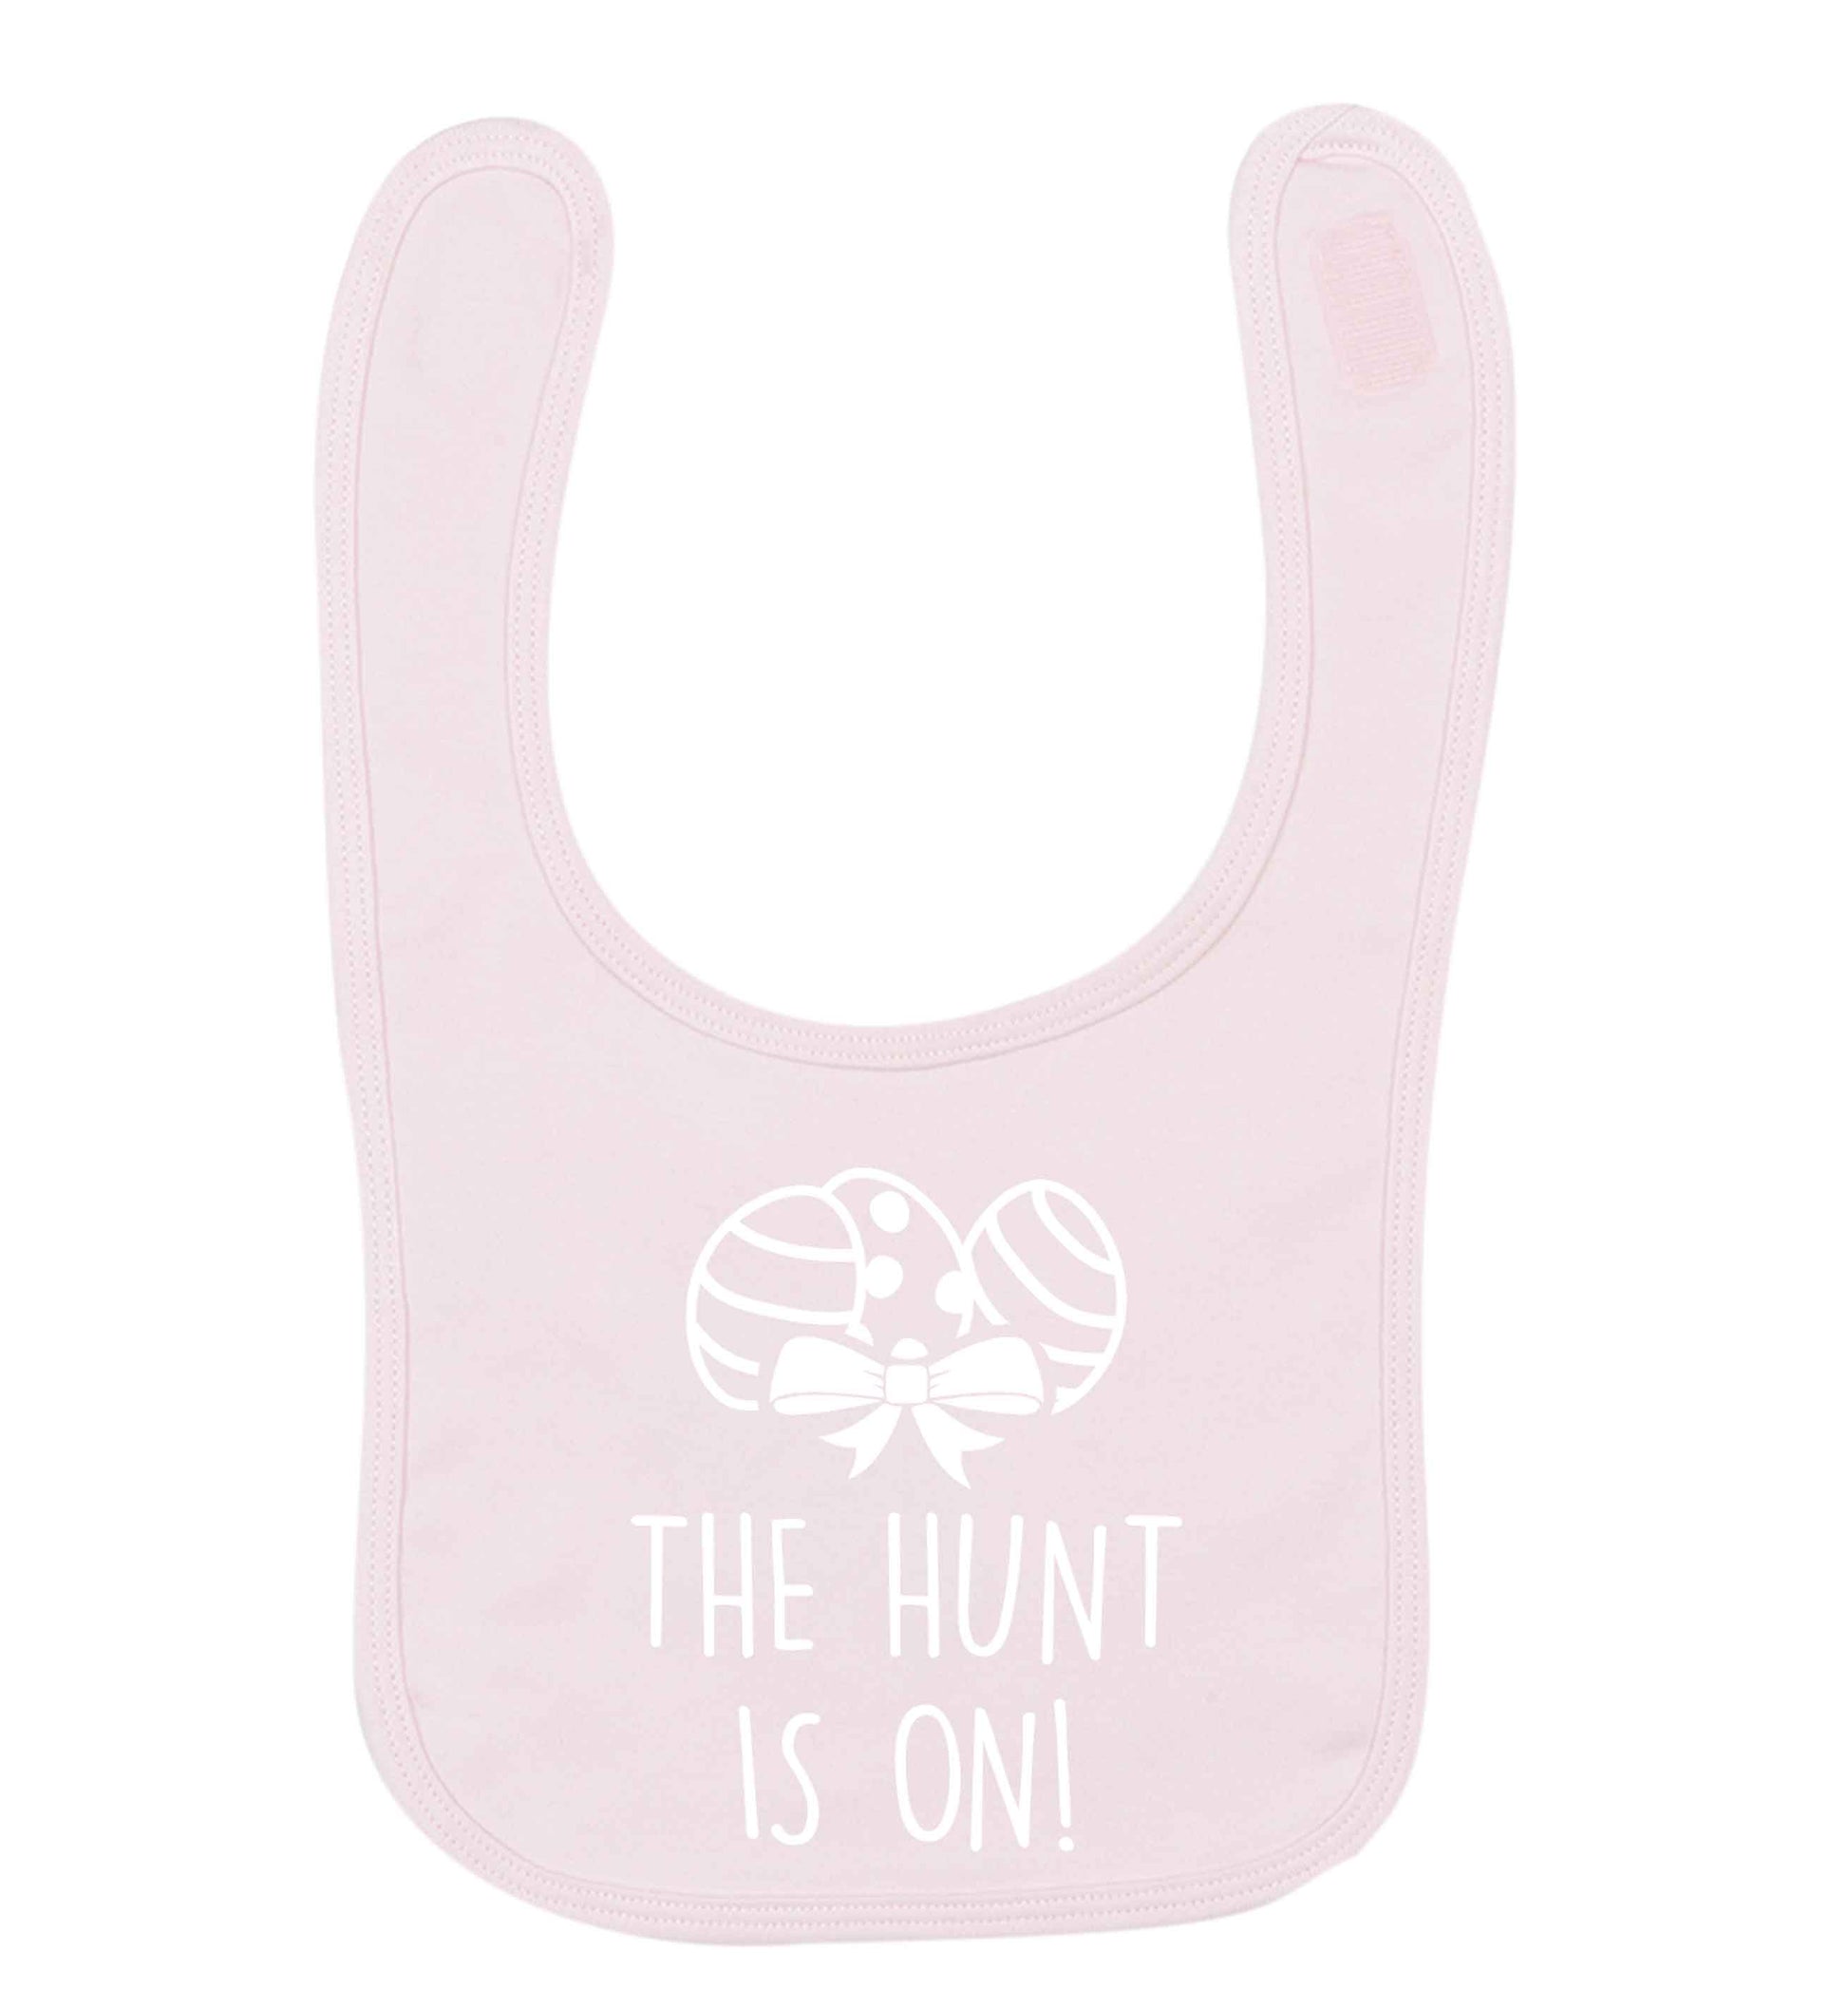 The hunt is on pale pink baby bib